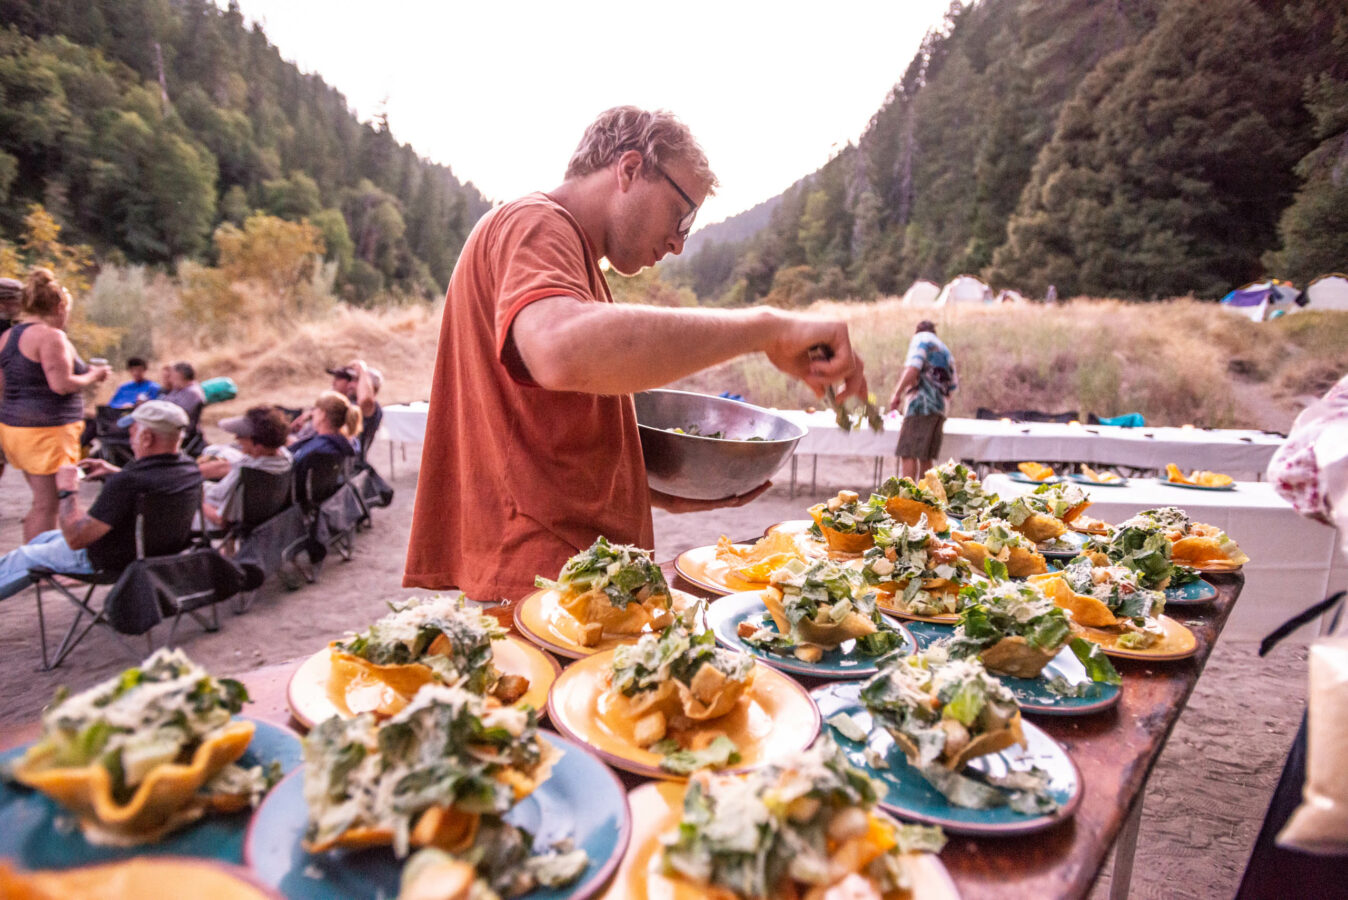 Guide preparing a gourmet meal for guests on the Rogue River.